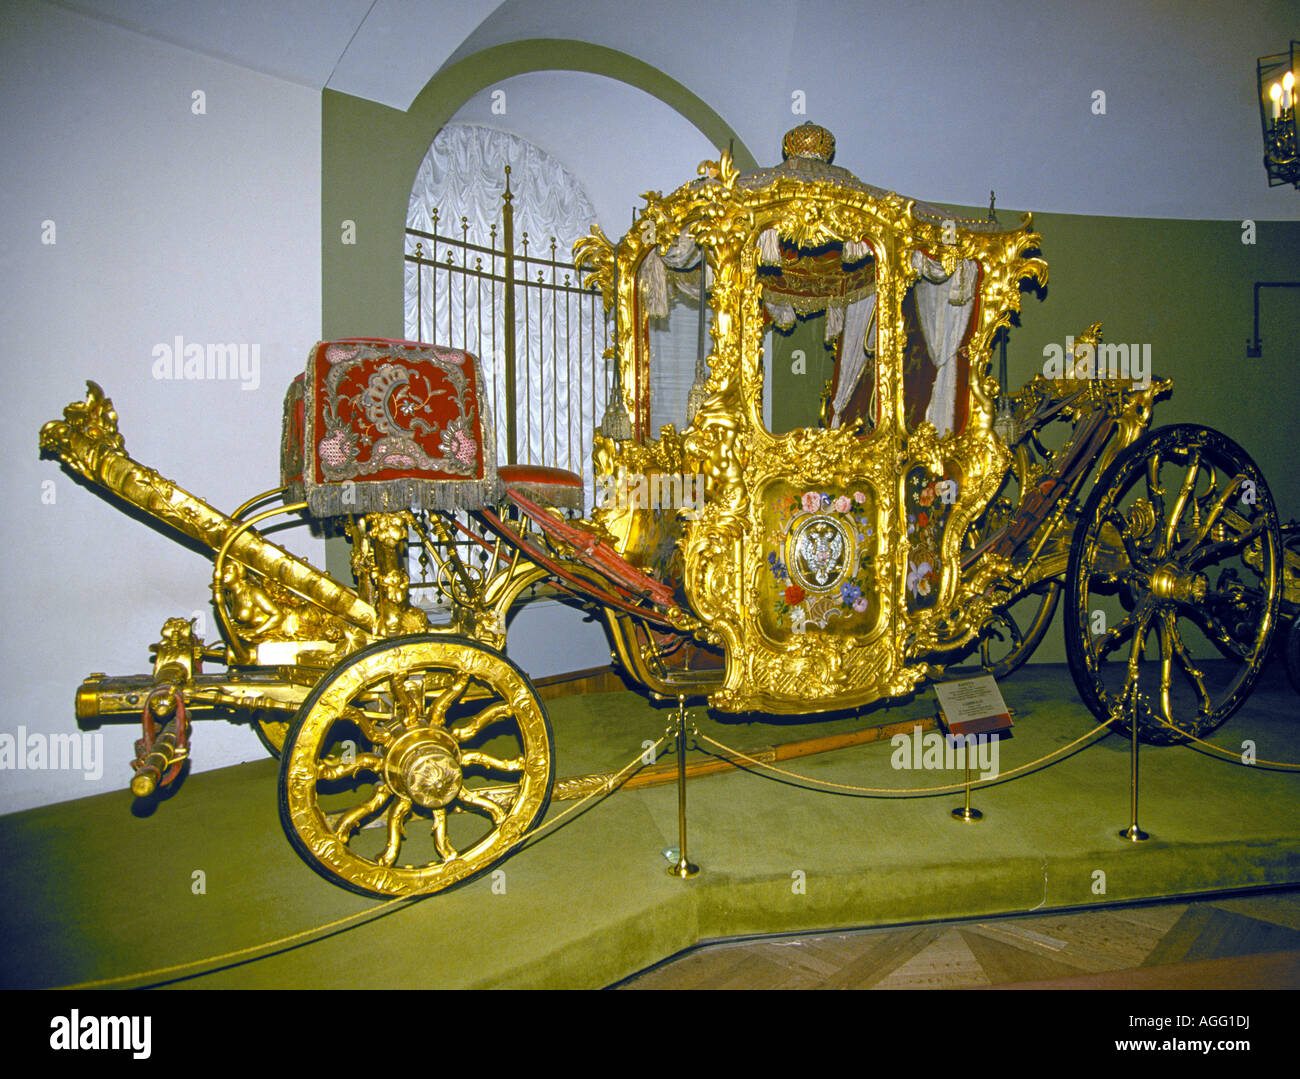 A golden carriage from the time of the Czars in the Armory Museum in Moscow Stock Photo